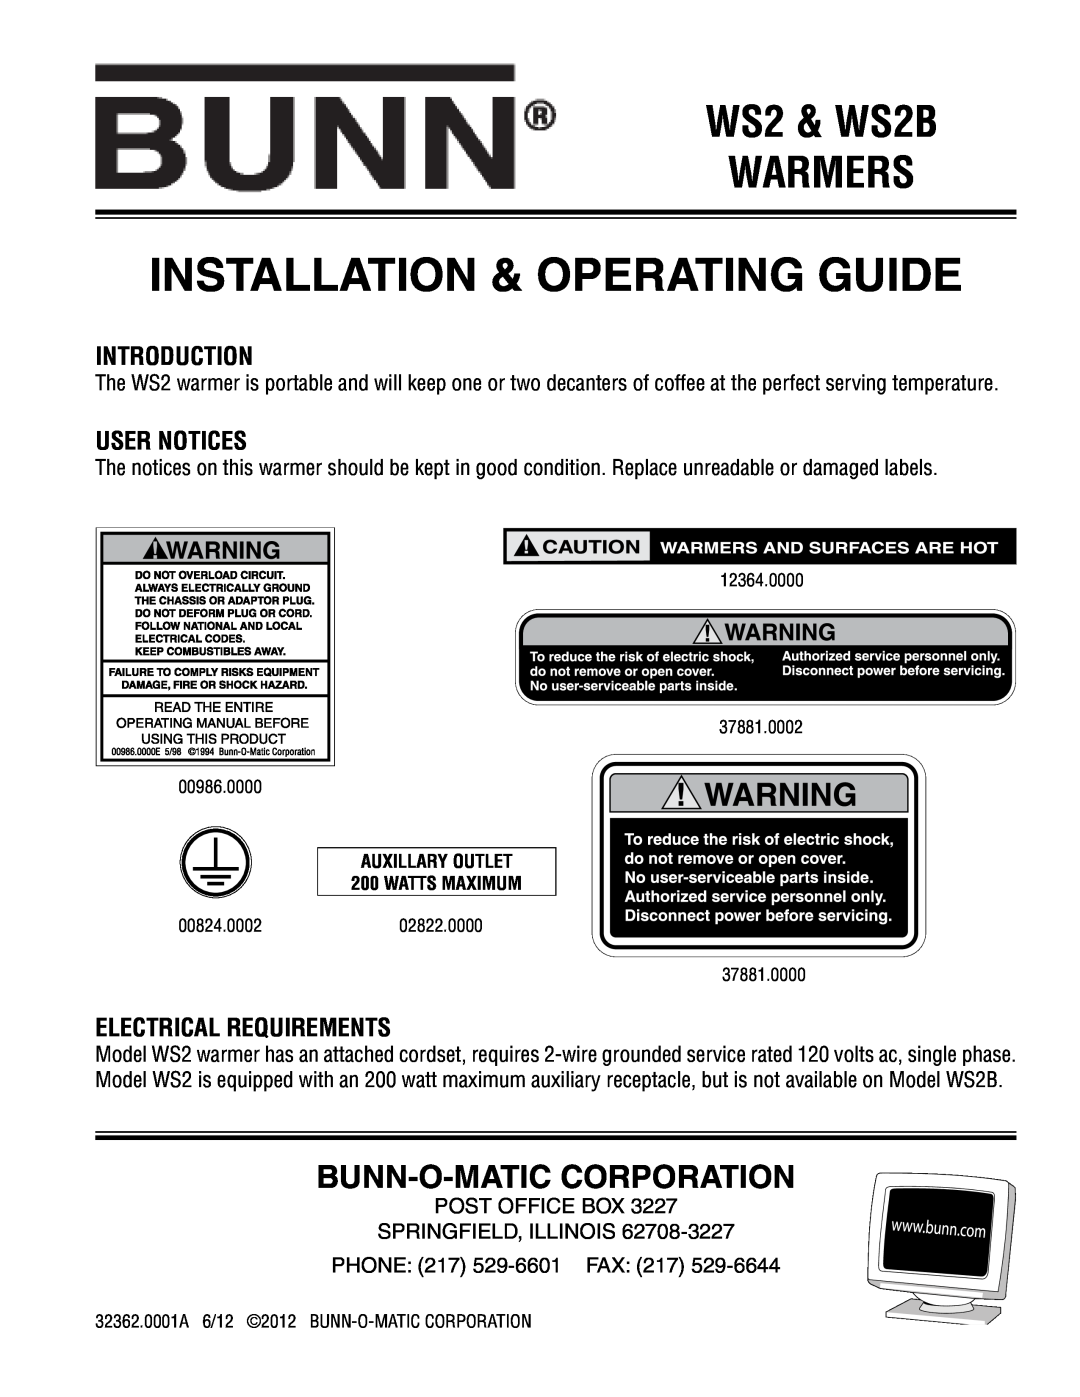 Bunn manual Introduction, User Notices, Electrical Requirements, Installation & Operating Guide, WS2 & WS2B WARMERS 